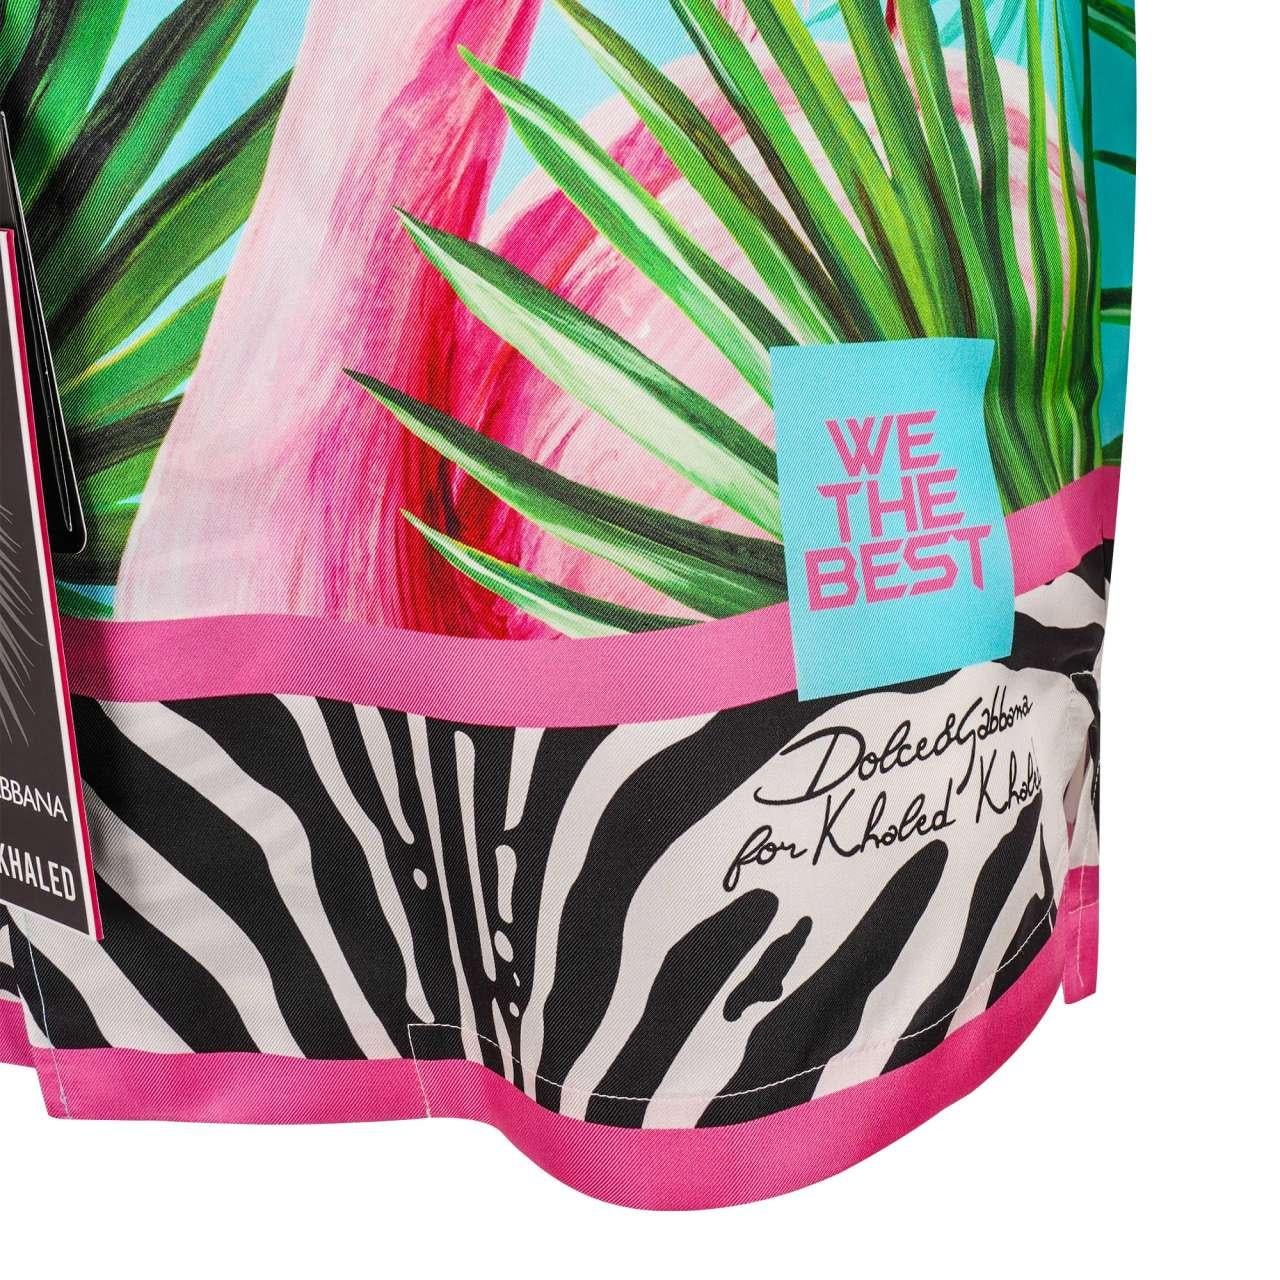 D&G - DJ Khaled Silk Flamingo Zebra Shirt Blouse with Sunglasses and CD 40 In Excellent Condition For Sale In Erkrath, DE